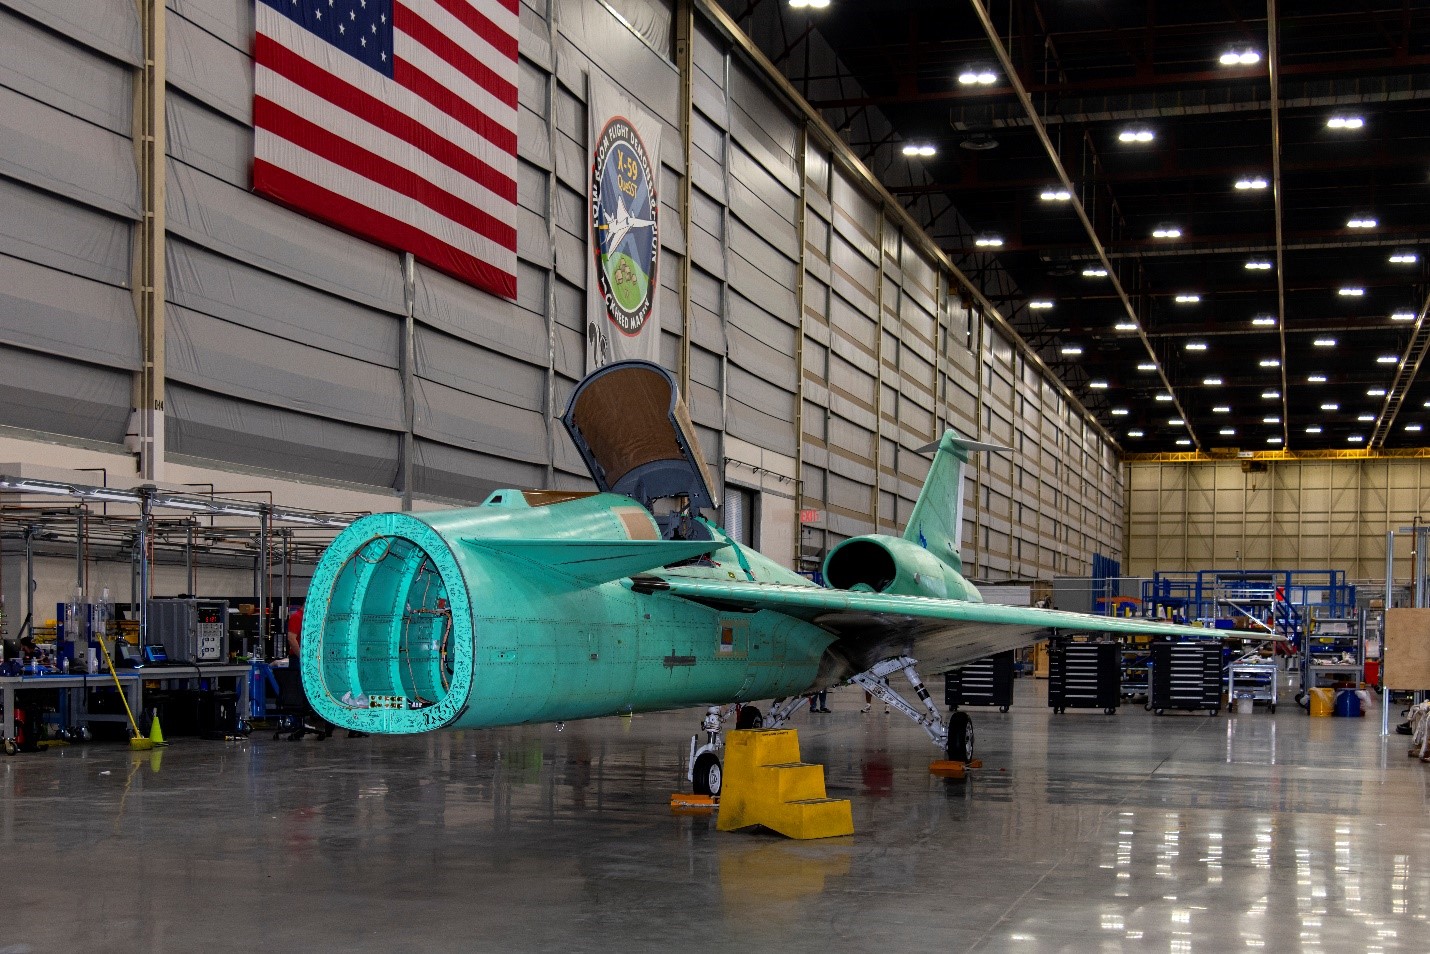 The X-59, unwrapped after transport back to Lockheed Martin’s Skunk Works facility in Palmdale, California, will now undergo final integration.